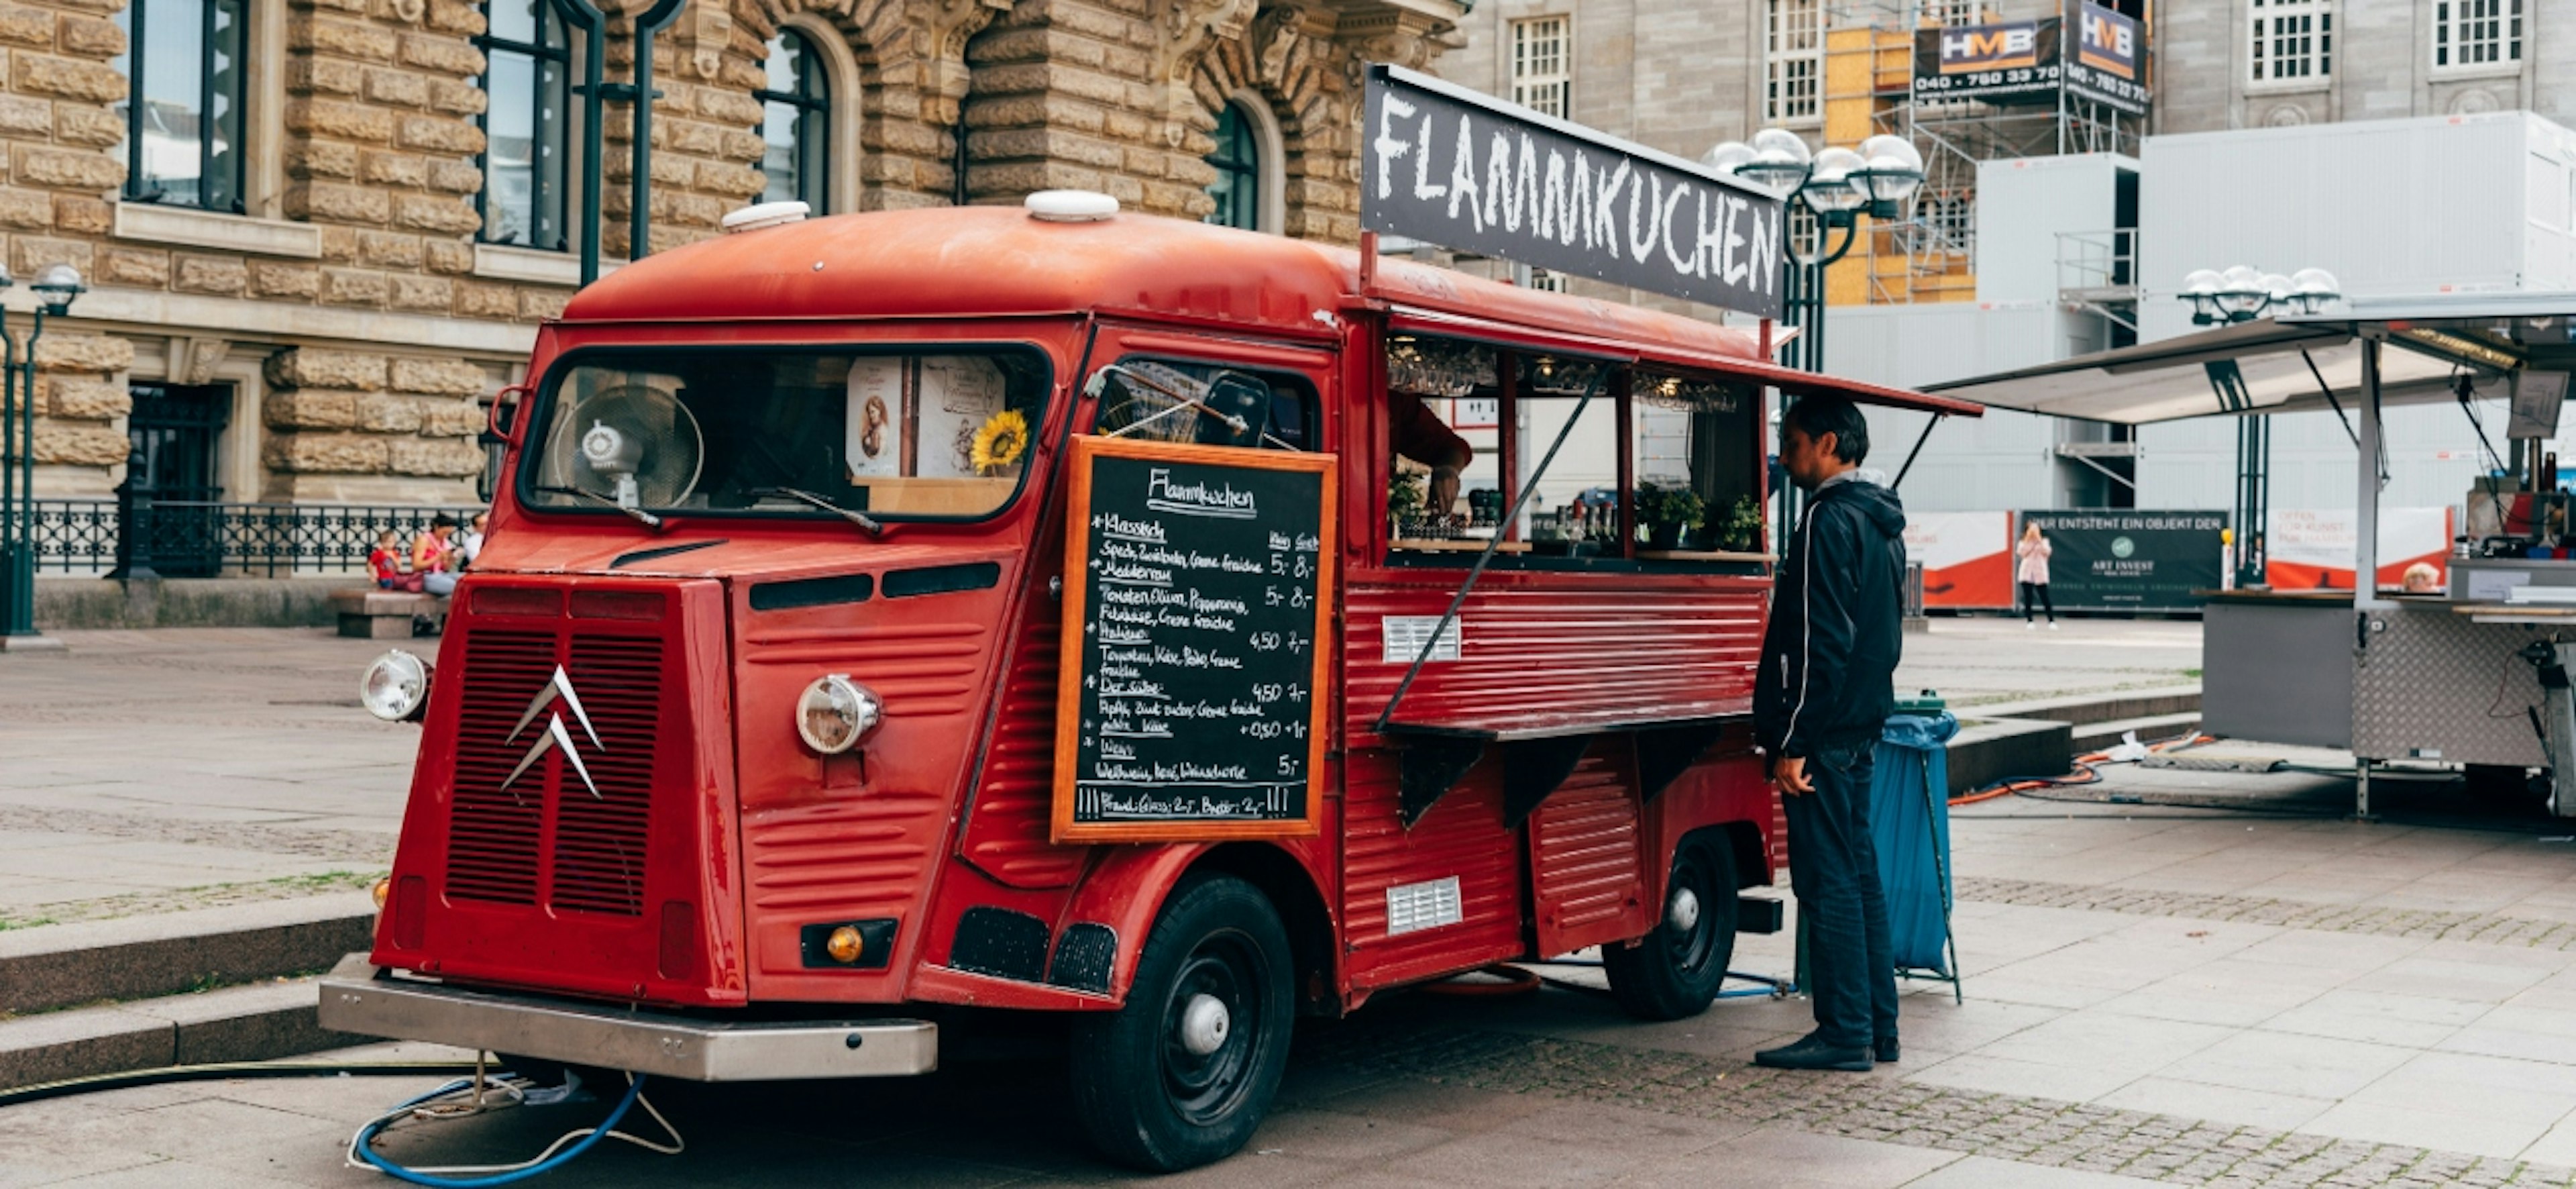 A man is buying flammkuchen or tarte flambee in a food truck